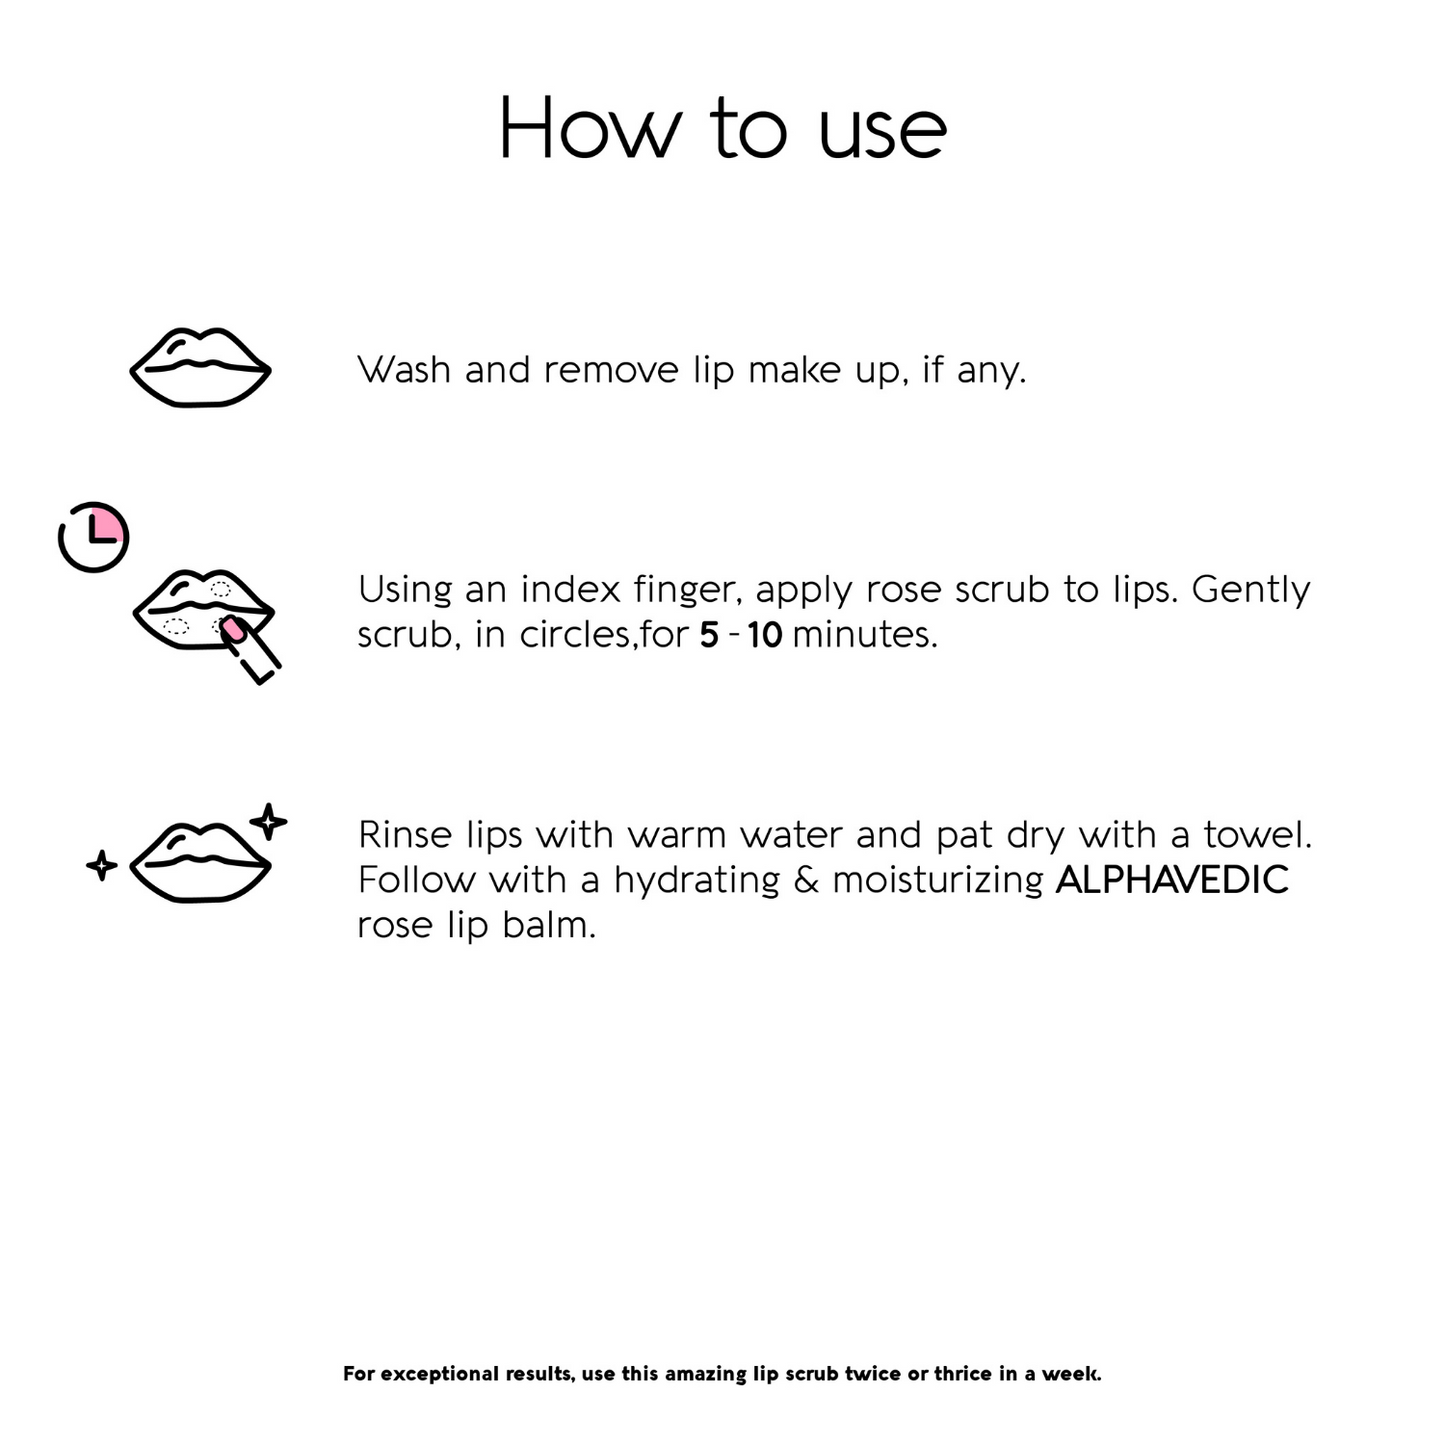 how to use rose lip balm